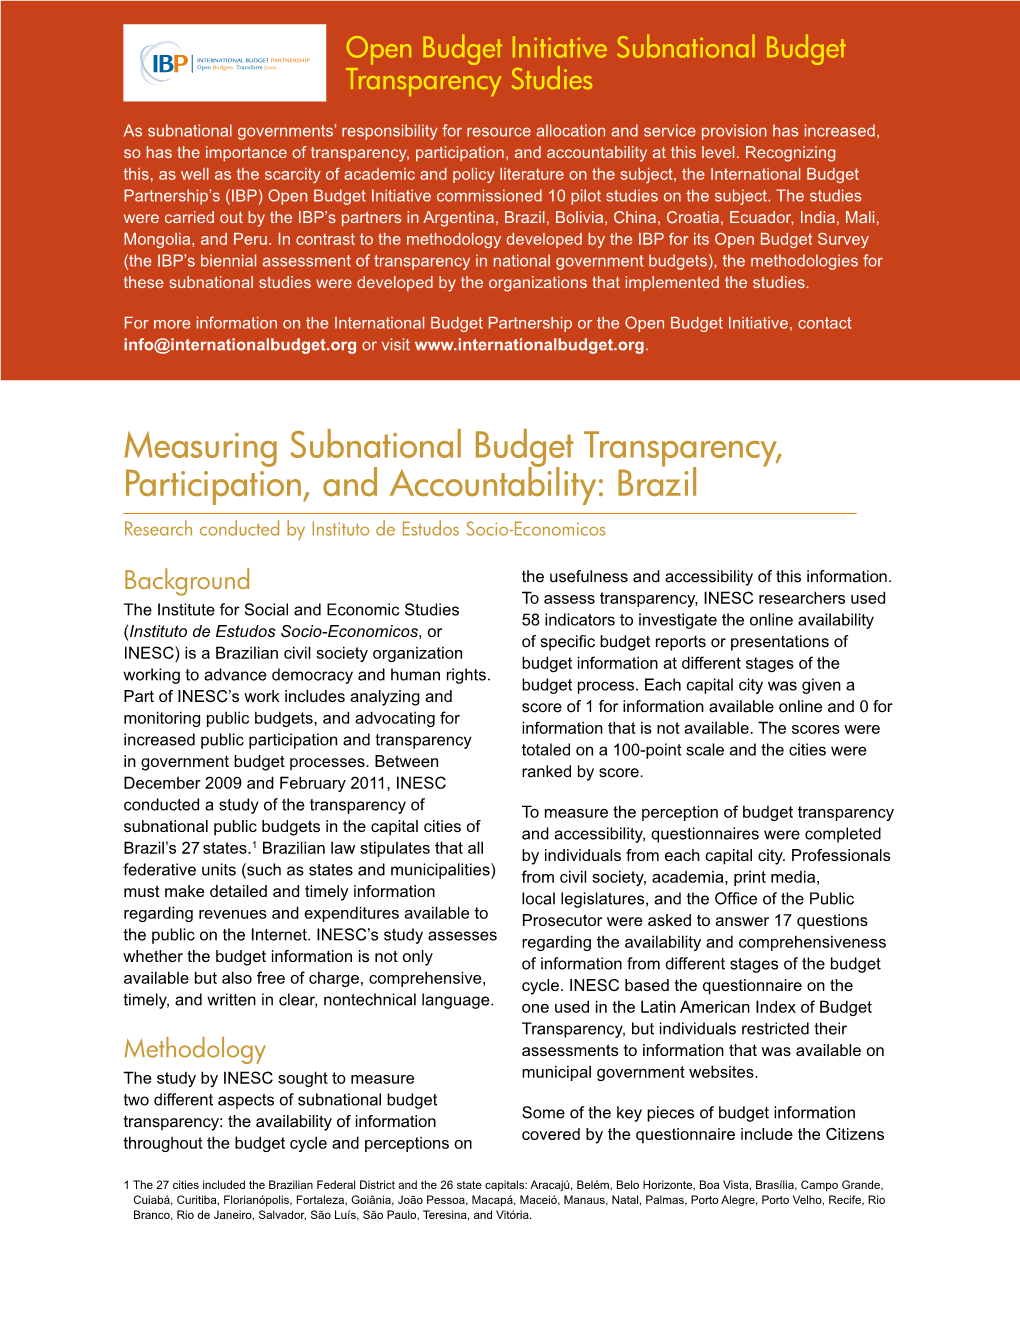 Measuring Subnational Budget Transparency, Participation, and Accountability: Brazil Research Conducted by Instituto De Estudos Socio-Economicos